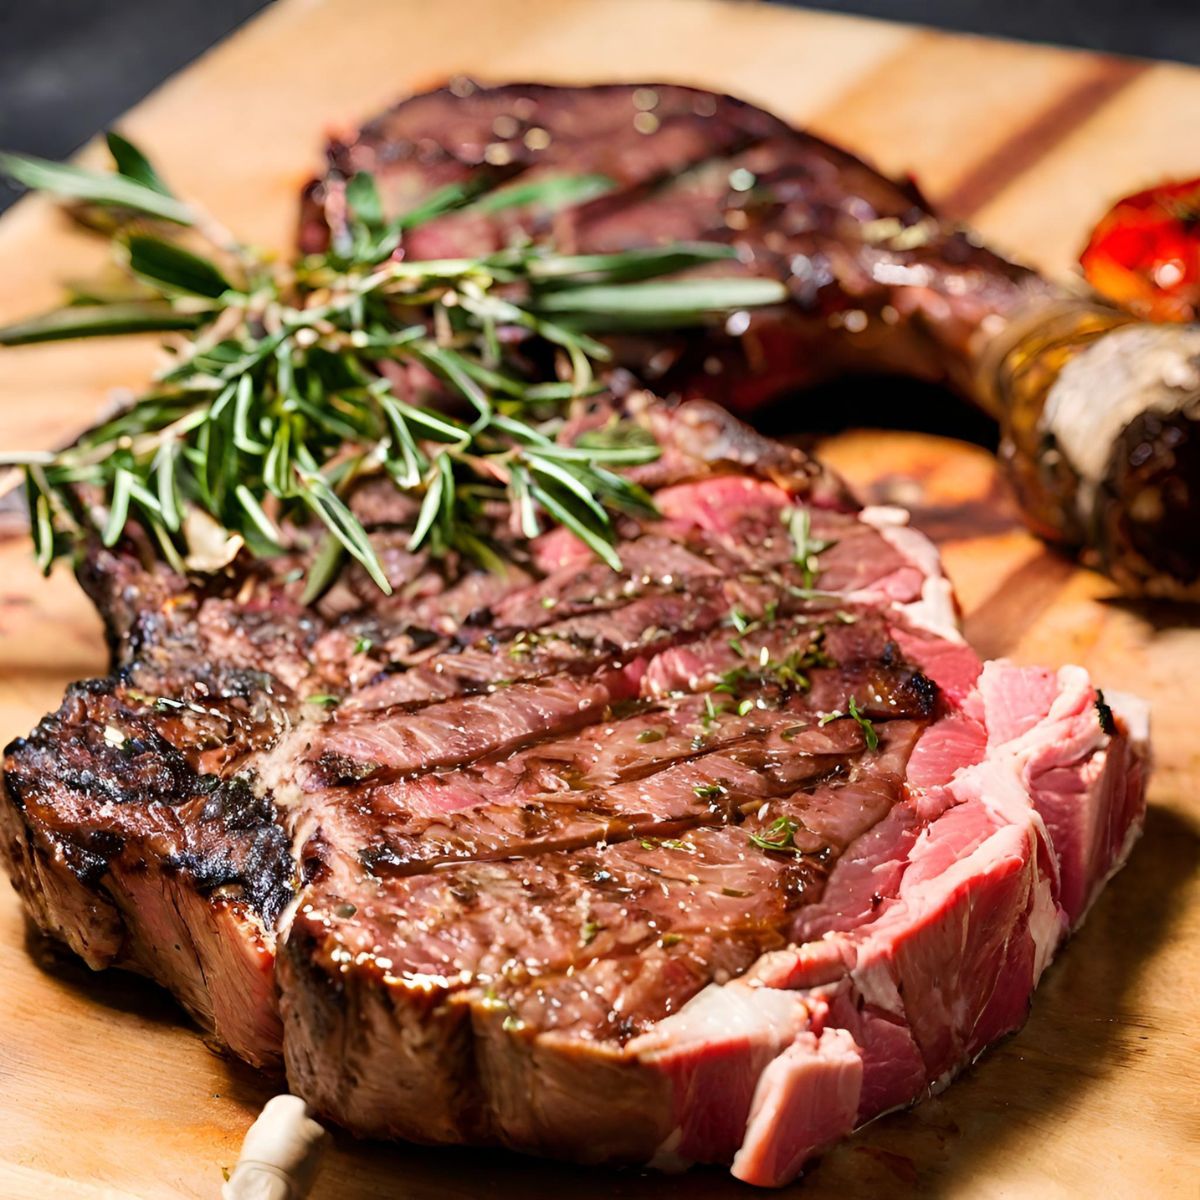 15 Steak Types That You Should Know About